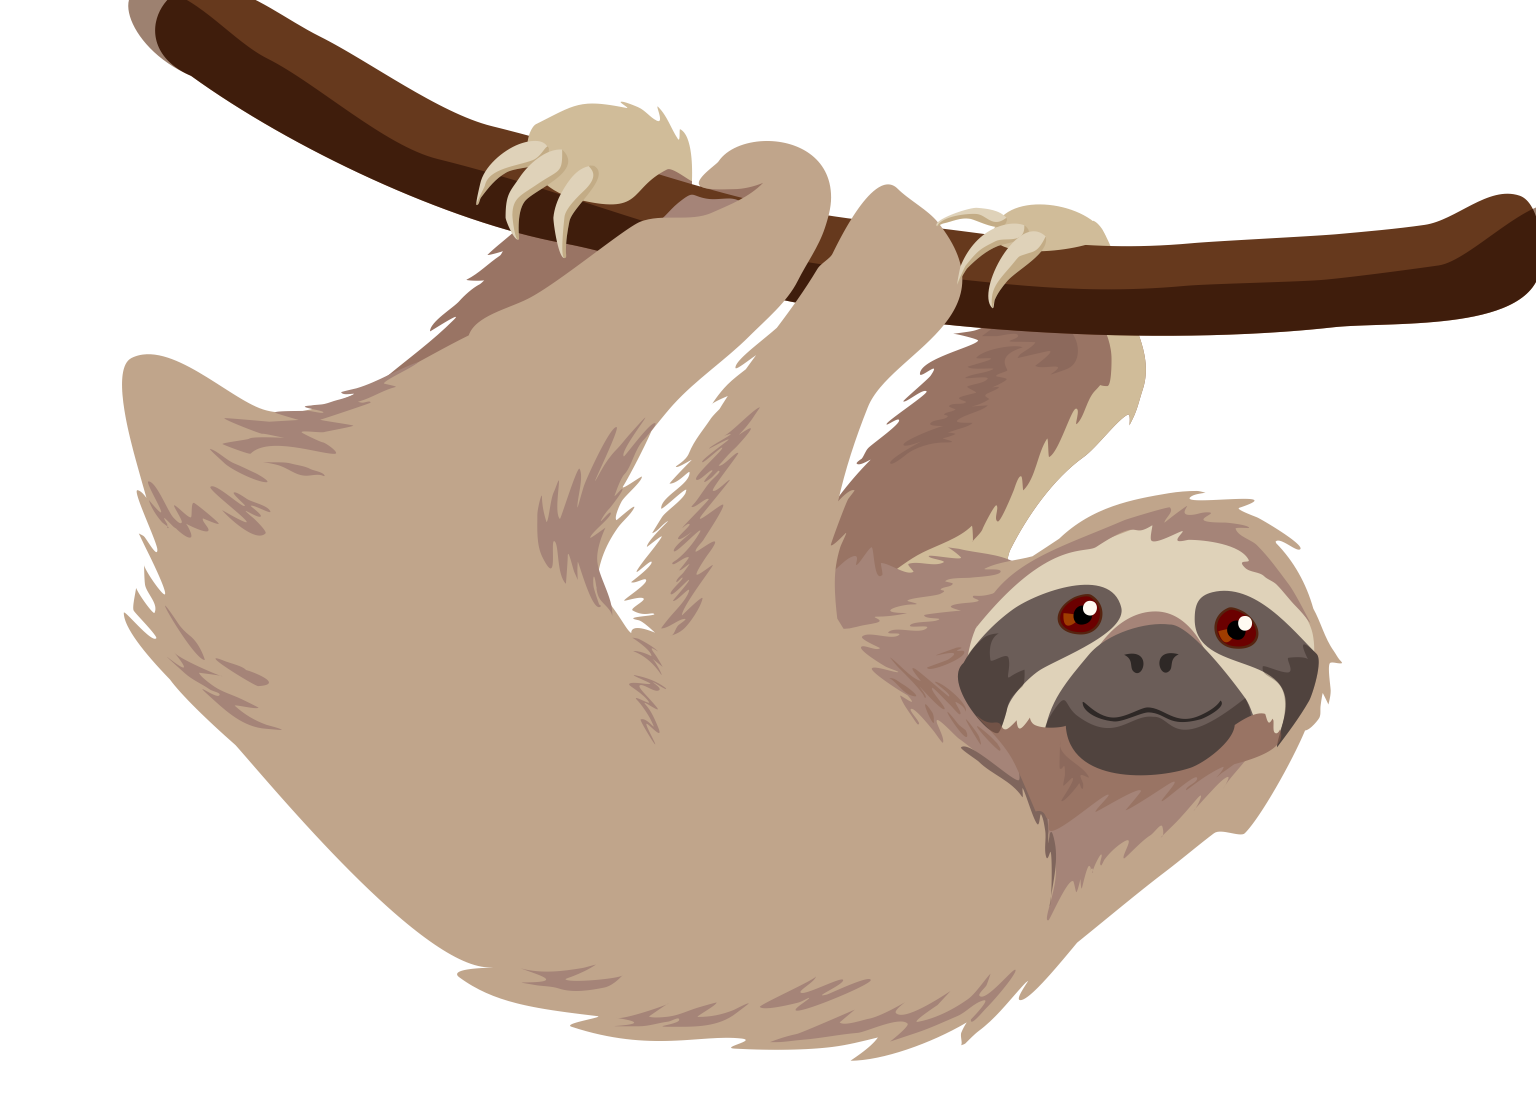 Hoffmanns twotoed sloth.